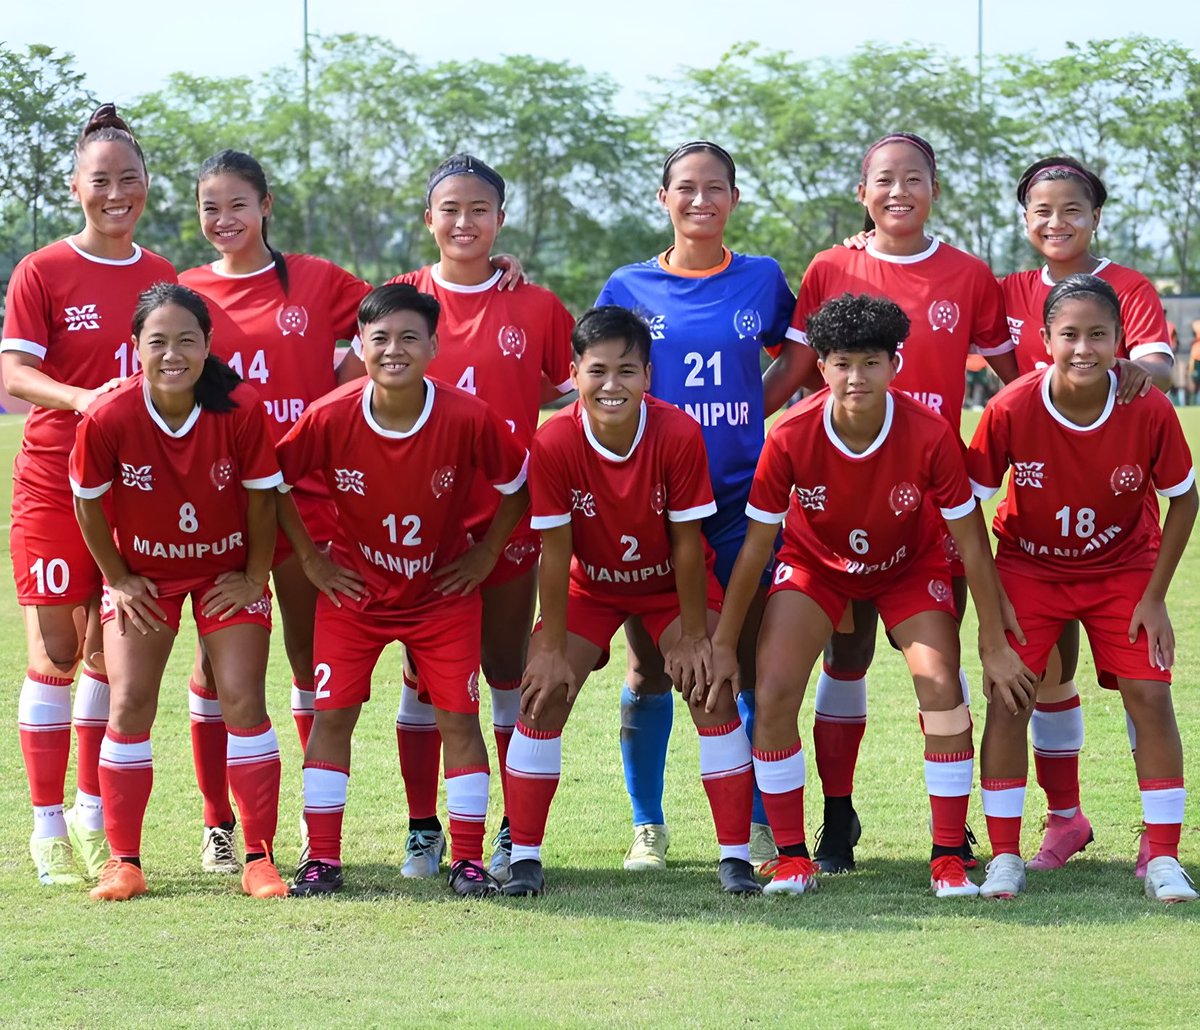 Manipur emerges as the CHAMPIONS of the 28th Senior Women’s NFC, sealing the victory with a 2-0 triumph over Haryana 👏🏆 #Manipur #IndianFootball